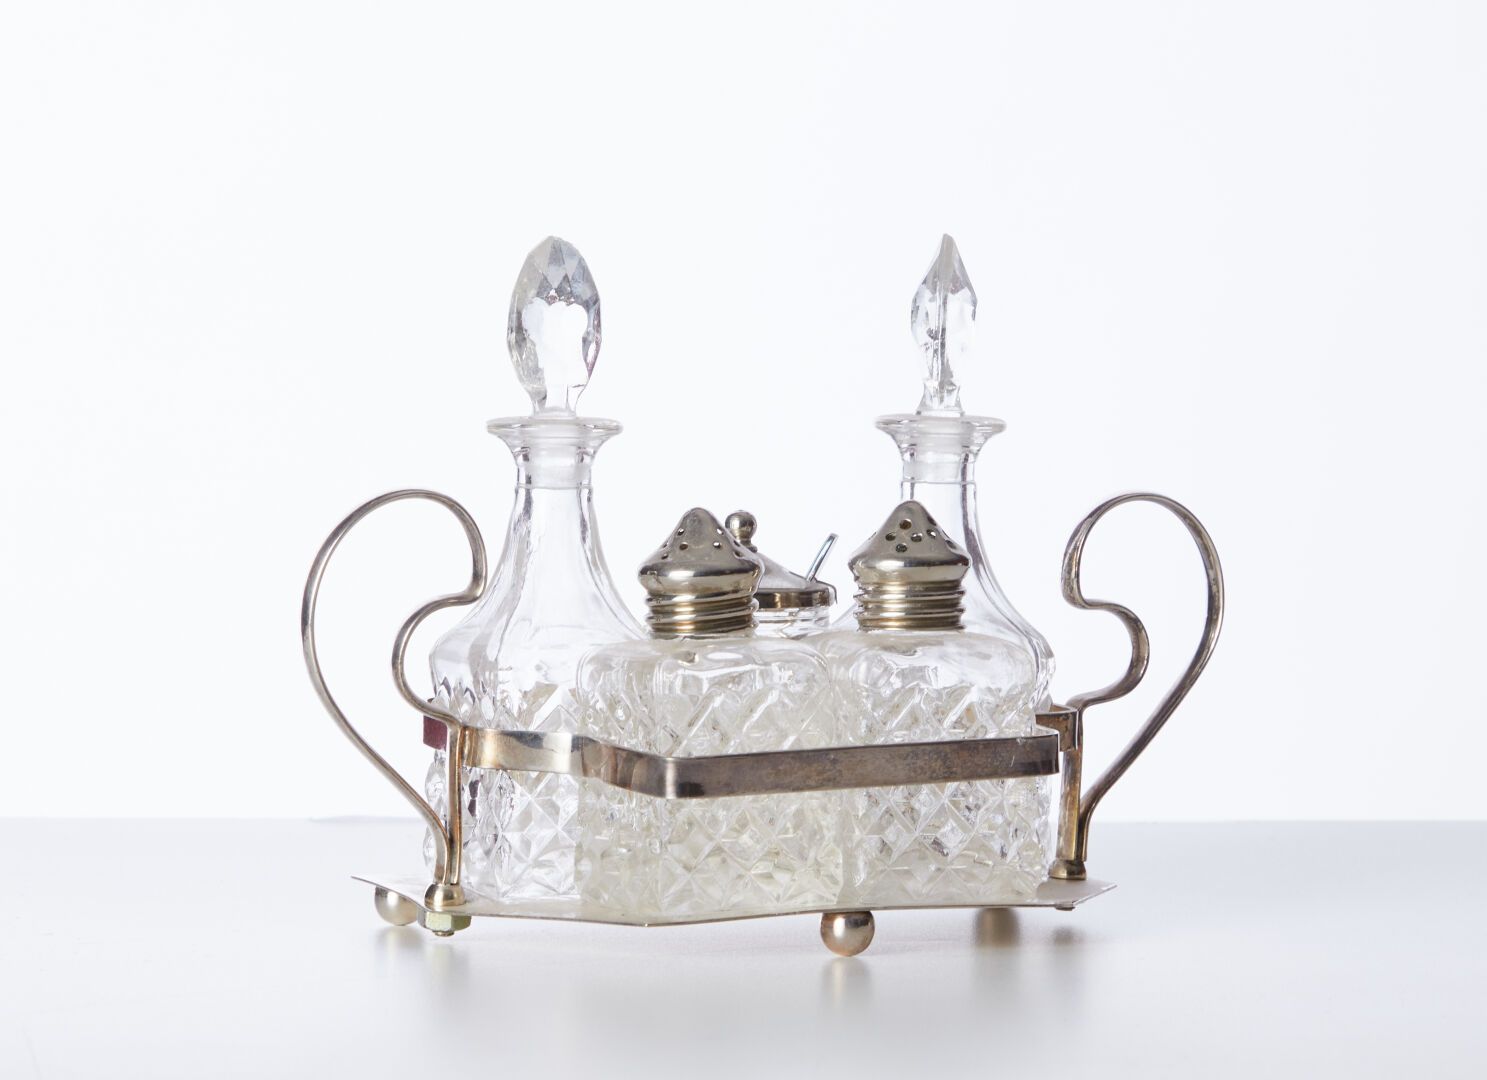 Null A condiment set in English metal with its bottles